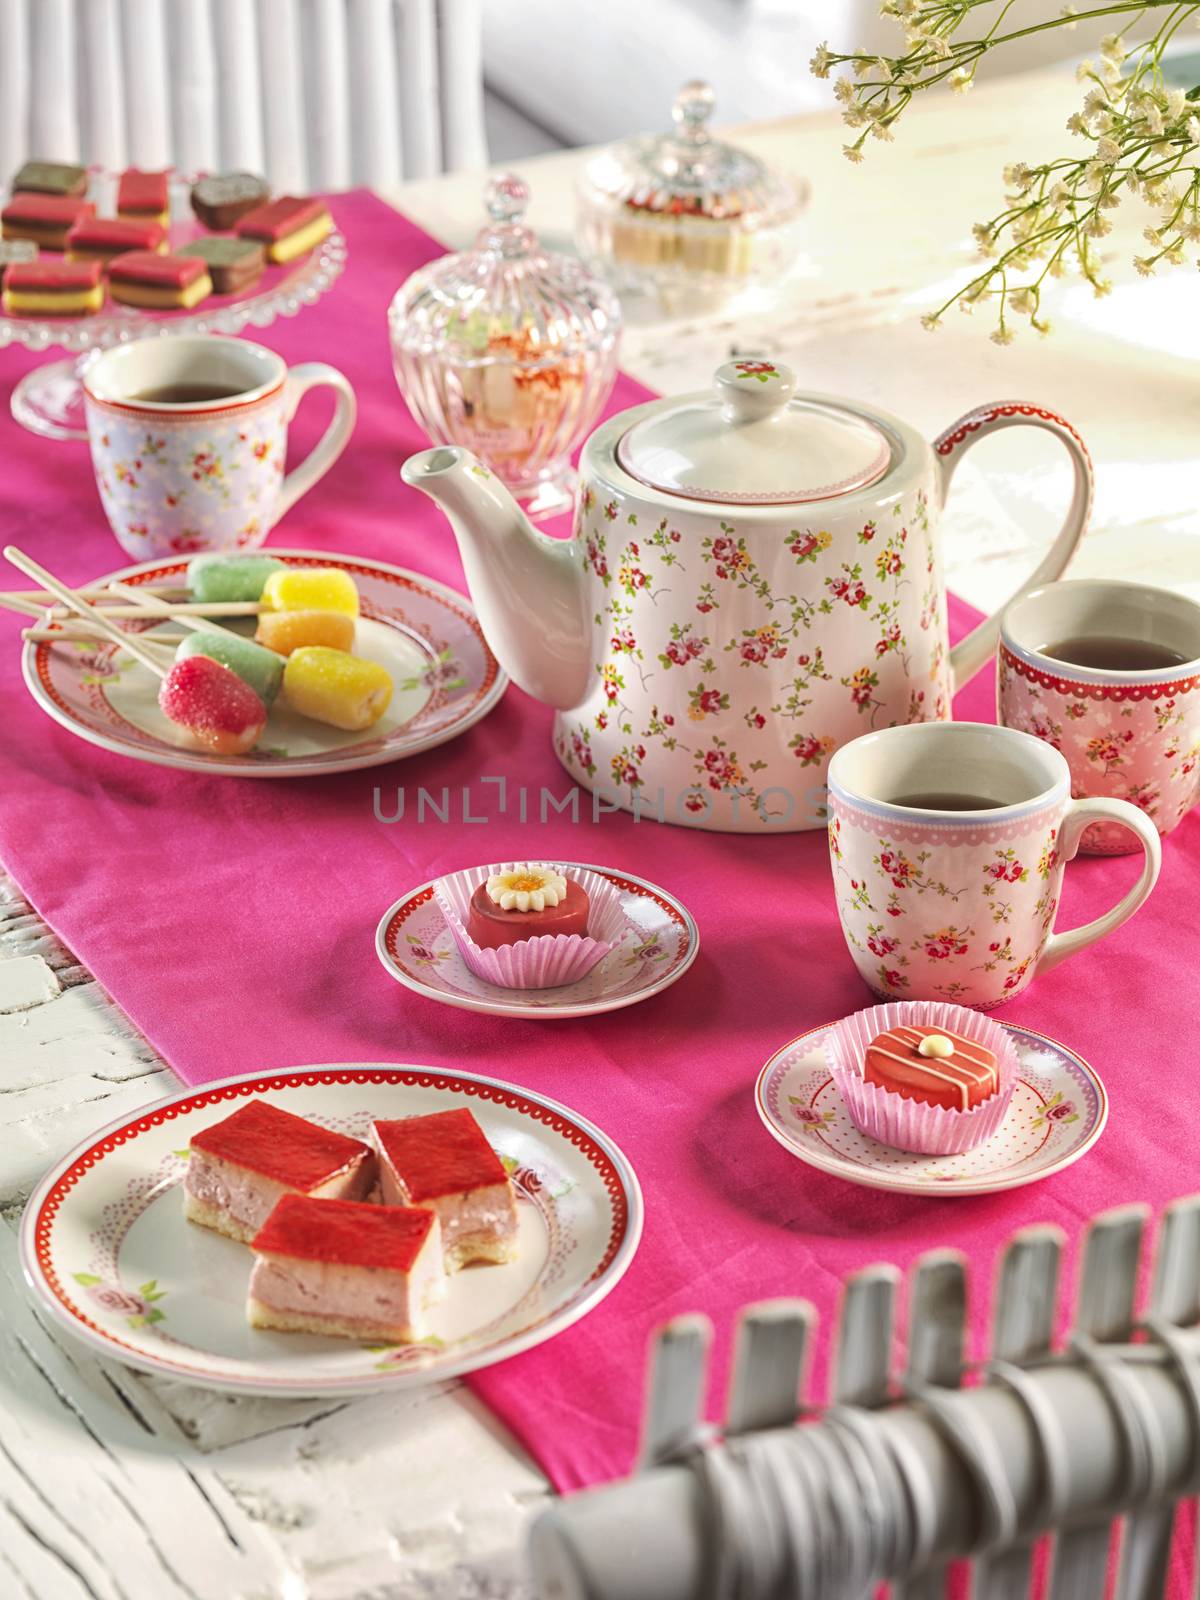 high tea on a table with a pink tablecloth by janssenkruseproductions